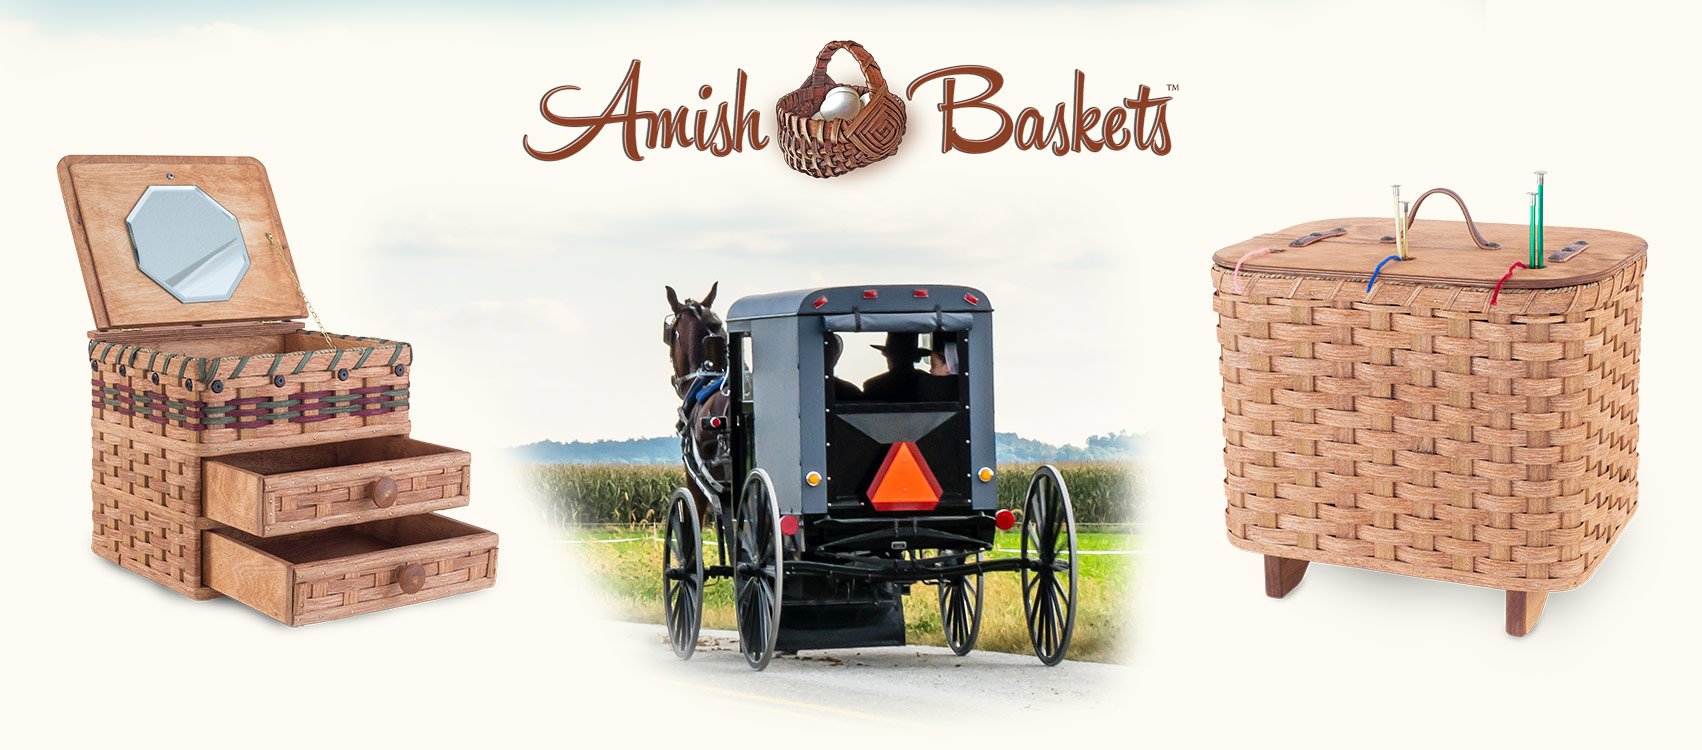 Airbnb Welcome Basket Ideas (Amish-Inspired Delights) – Amish Baskets